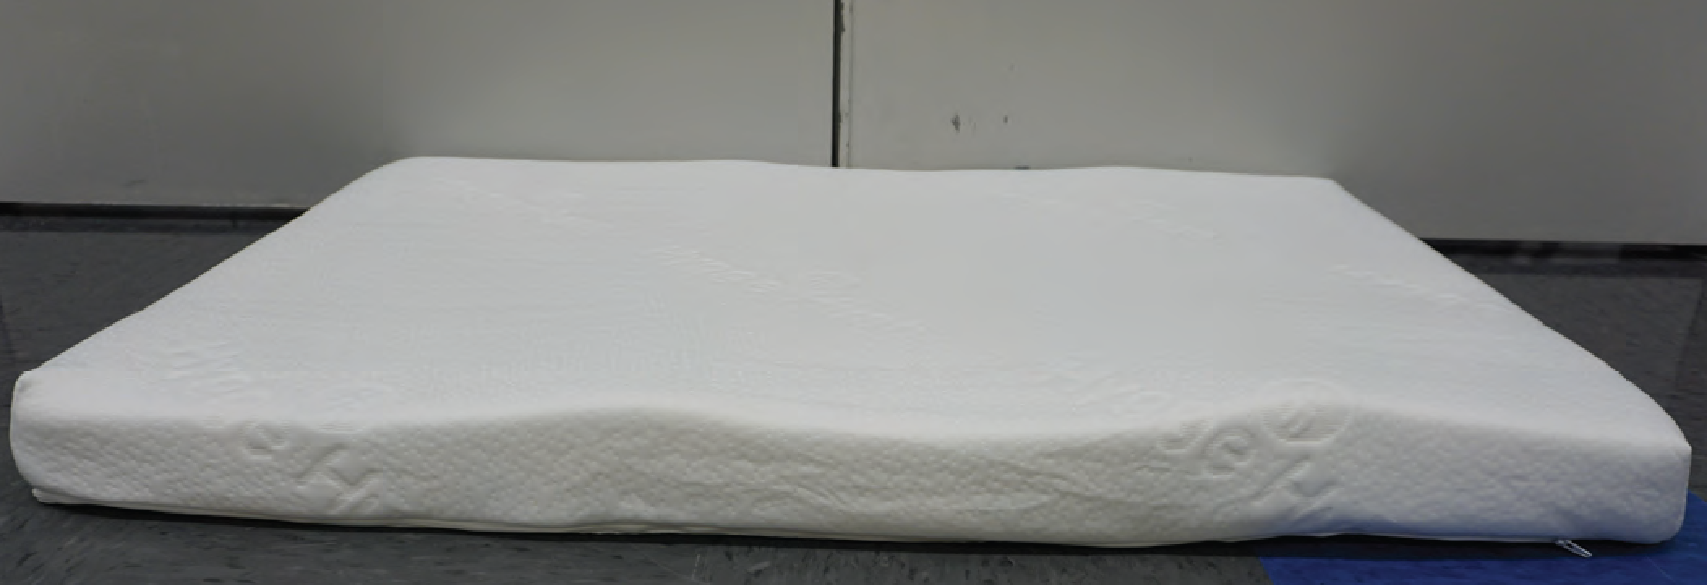 Side View of Mattress with Brand Name and Logo